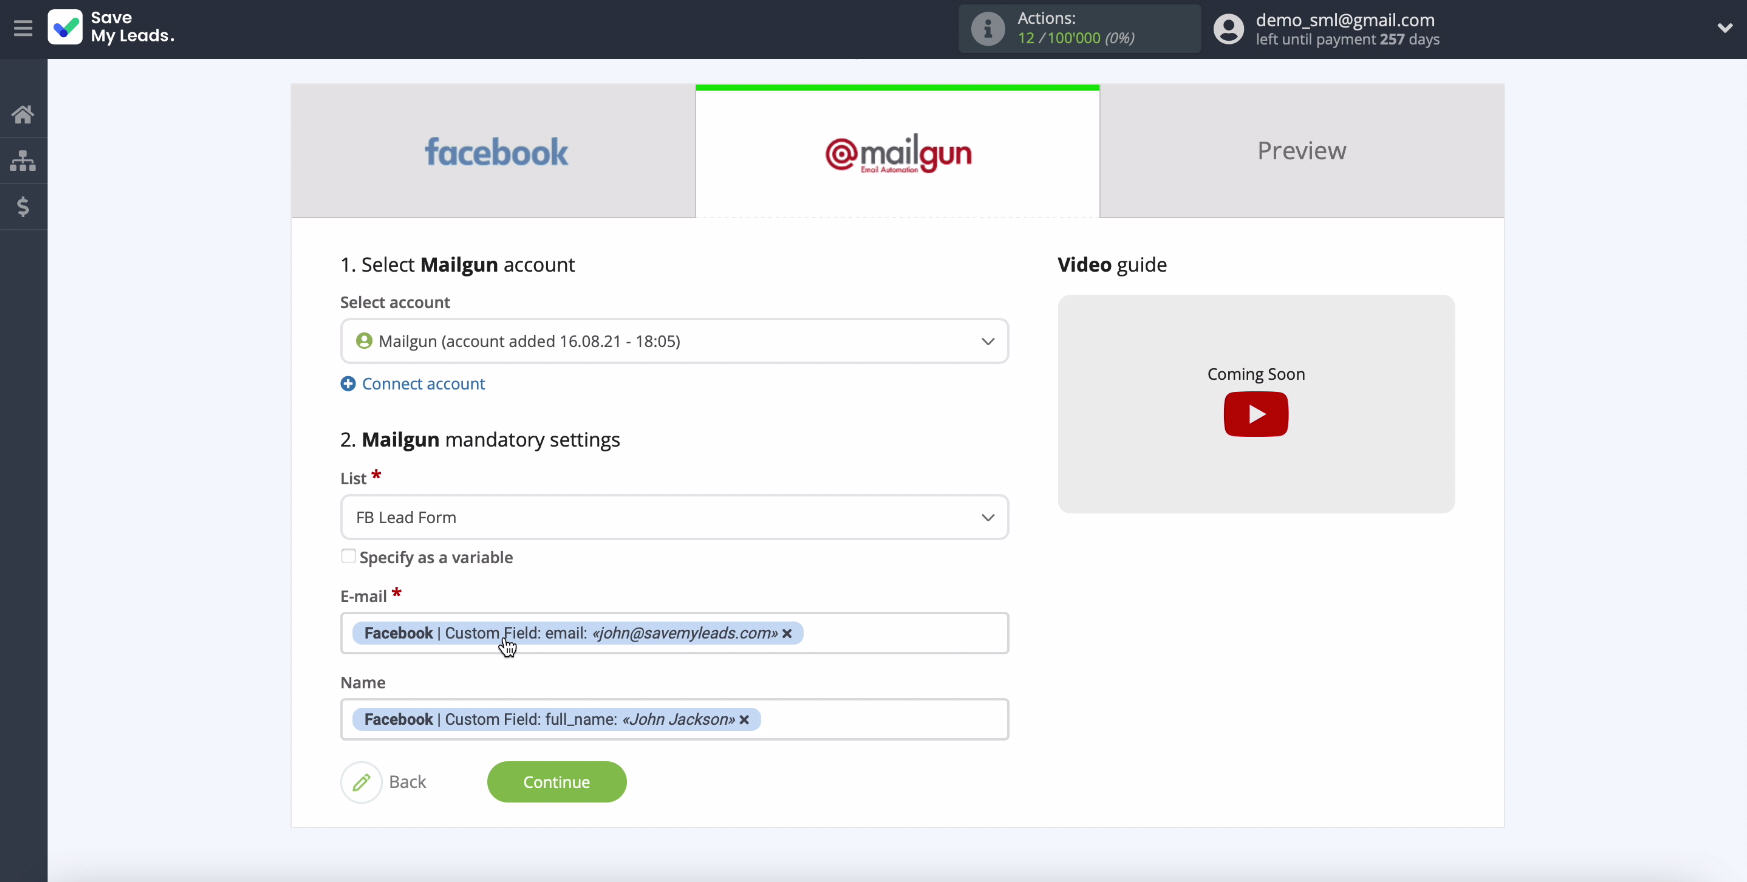 Facebook and Mailgun integration | Fields for creating a contact